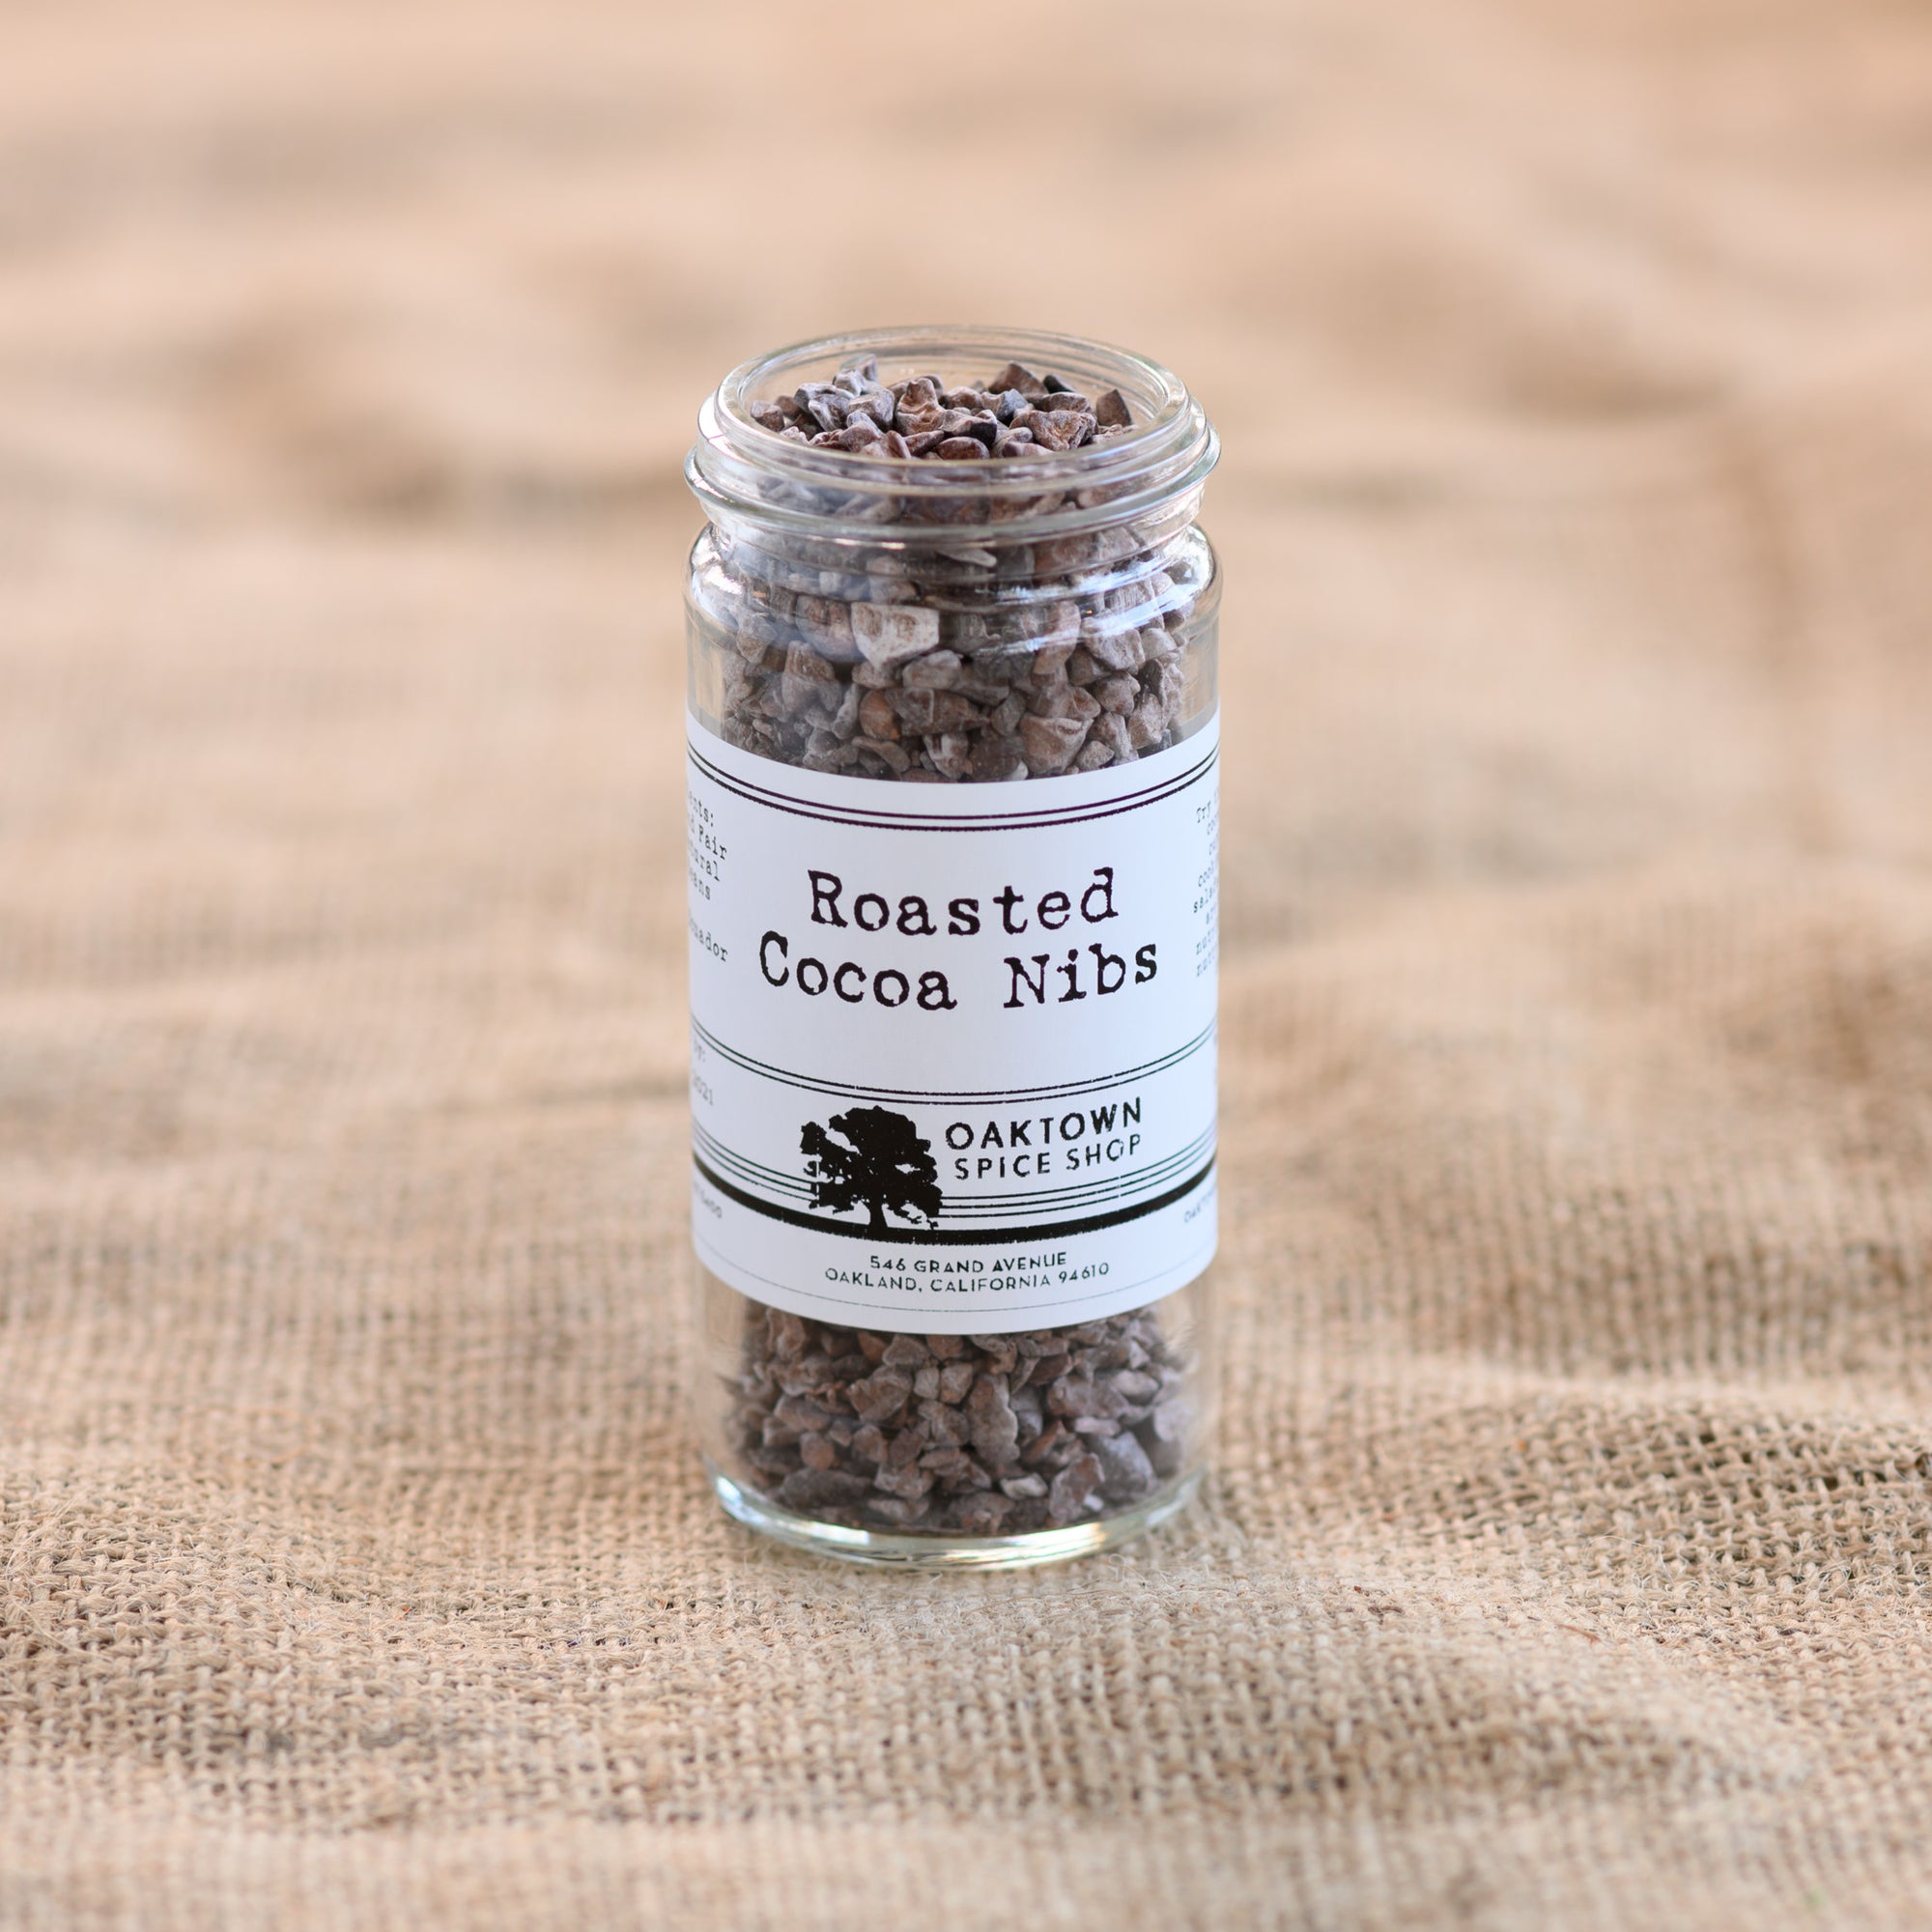 Roasted Cocoa Nibs from Oaktown Spice Shop